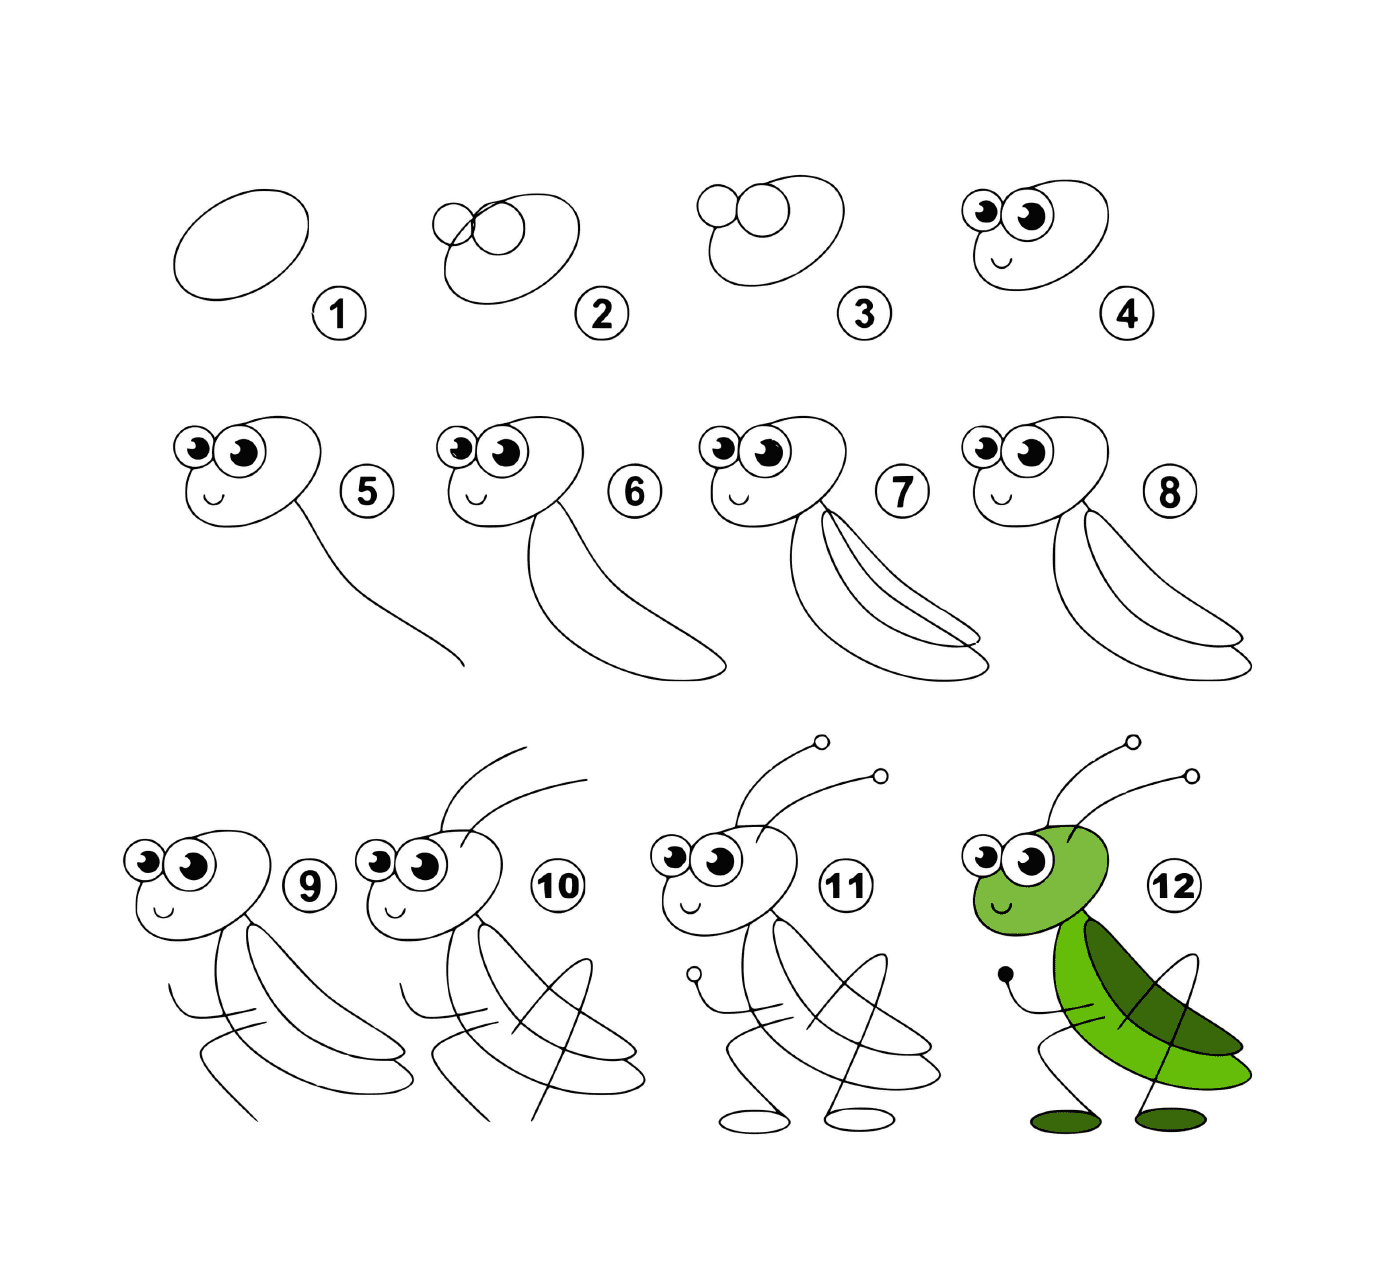  How to draw a grasshopper easily 